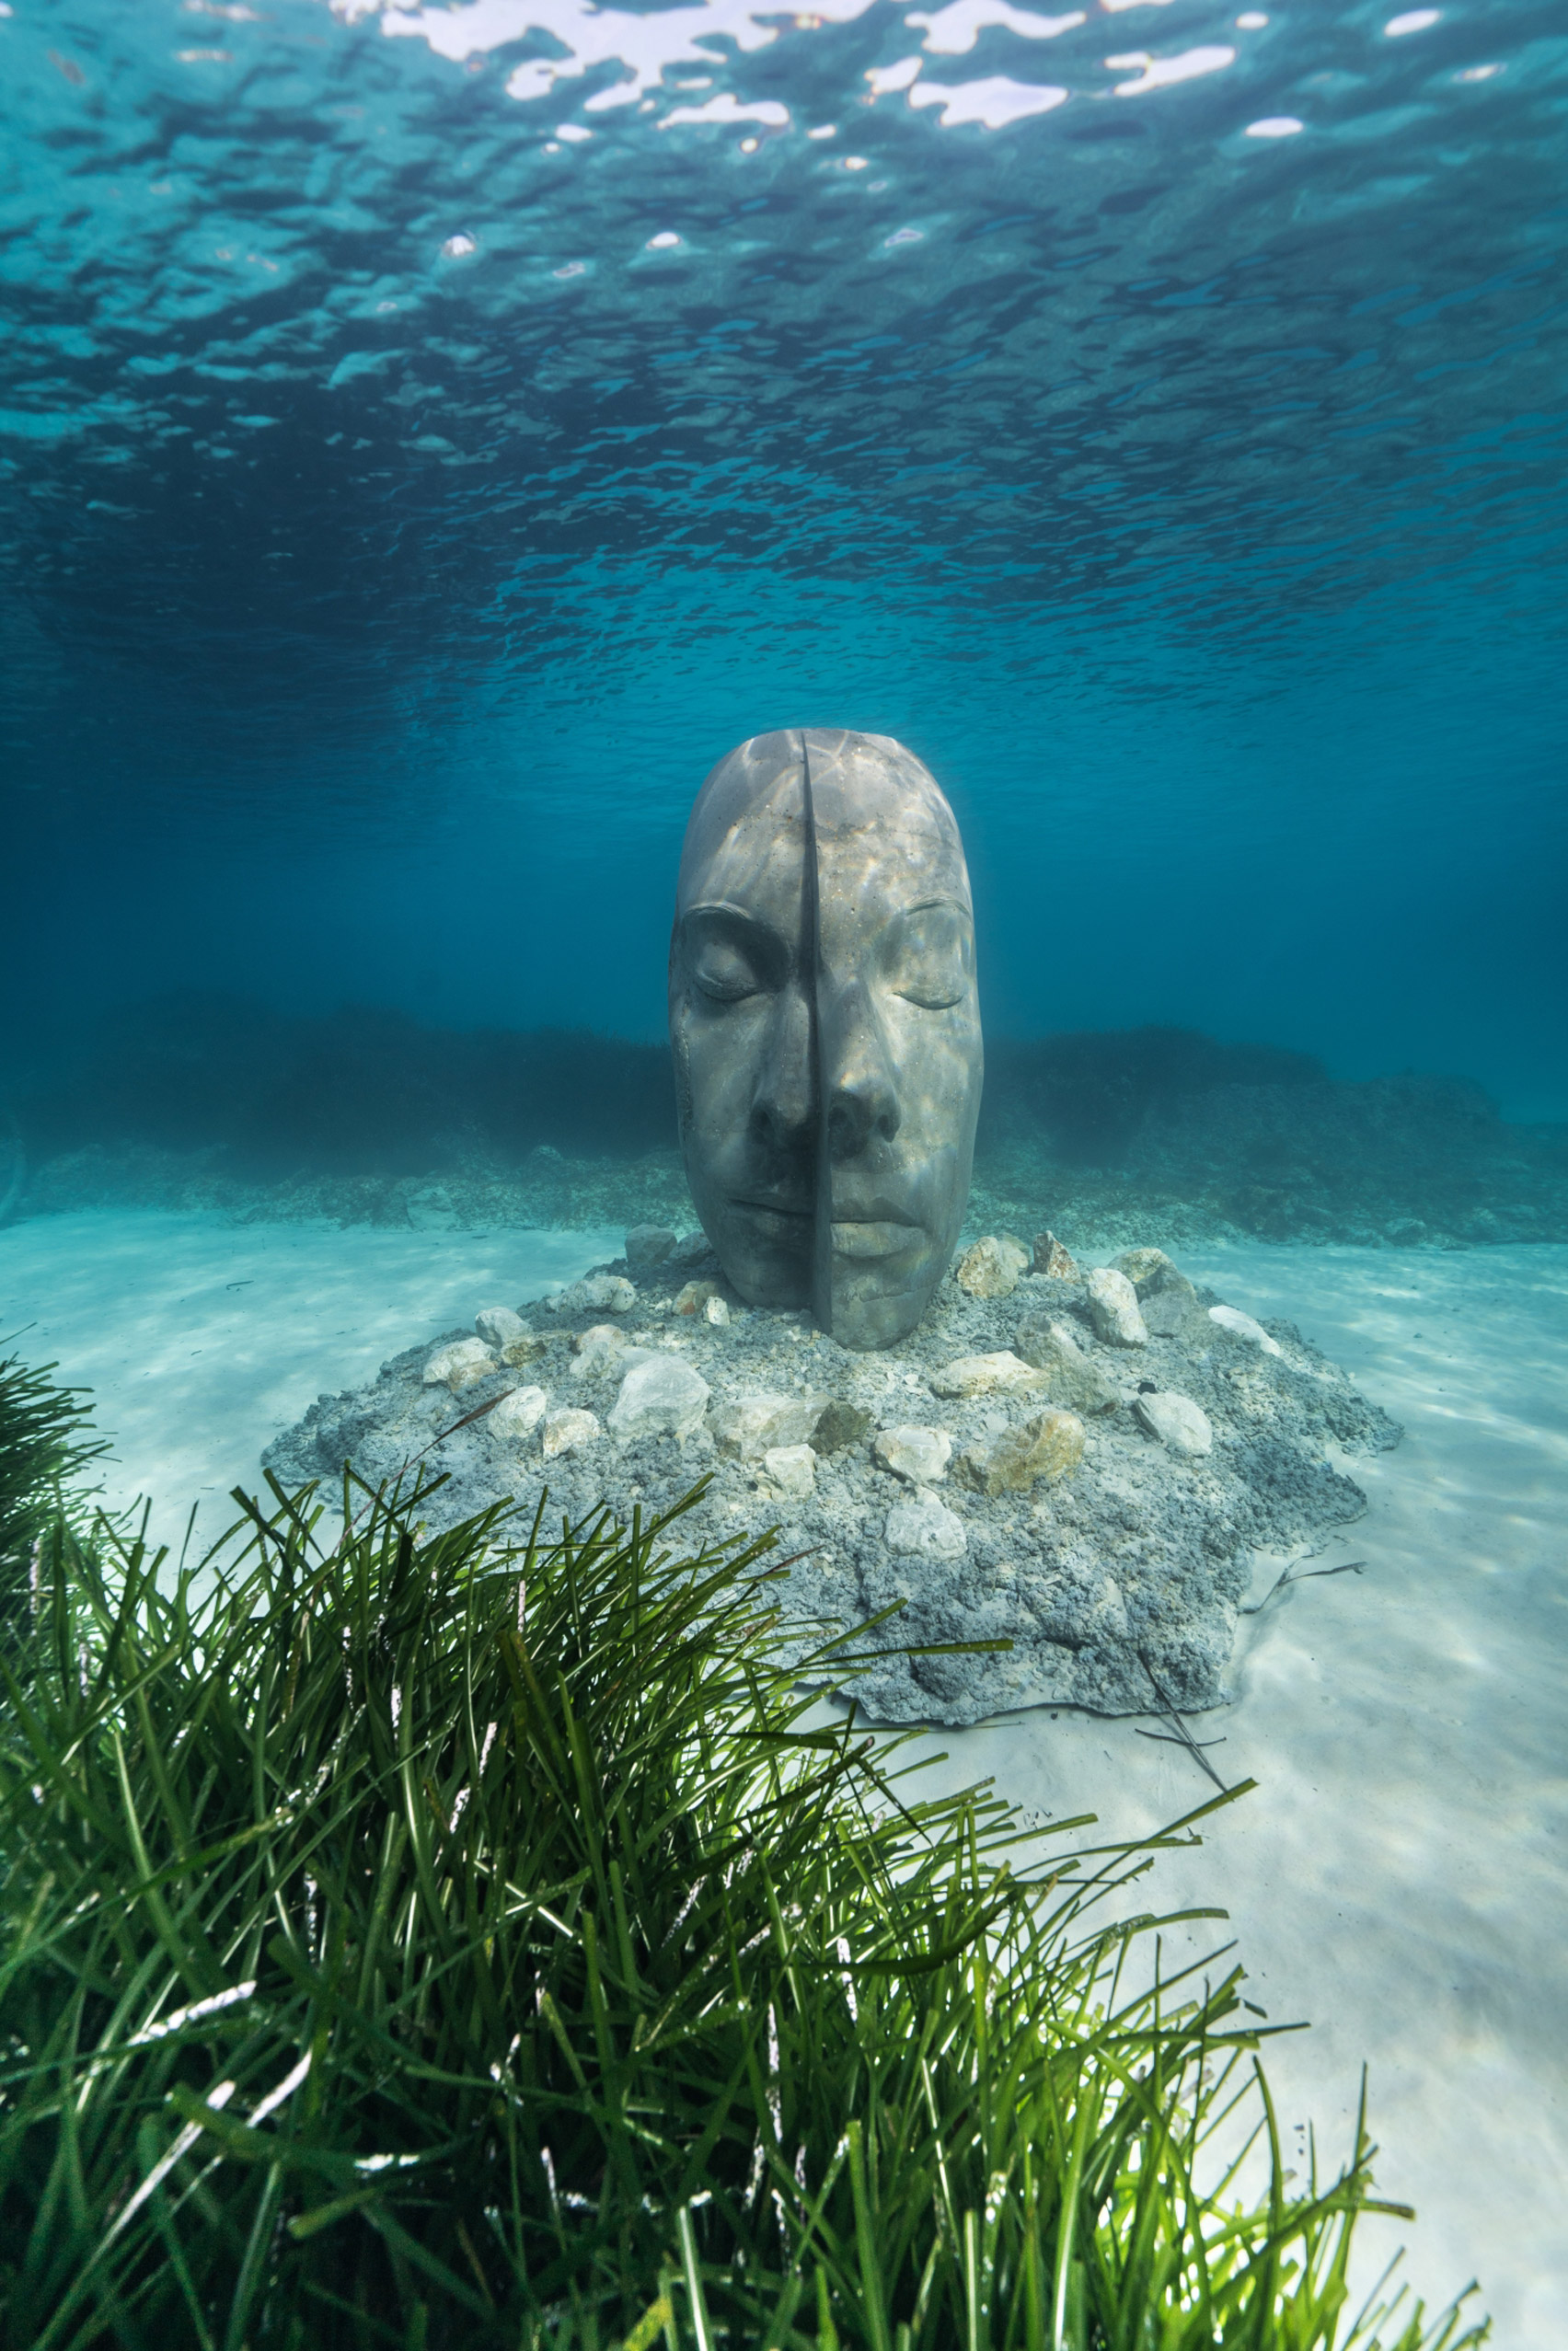 Home - Underwater Sculpture by Jason deCaires Taylor